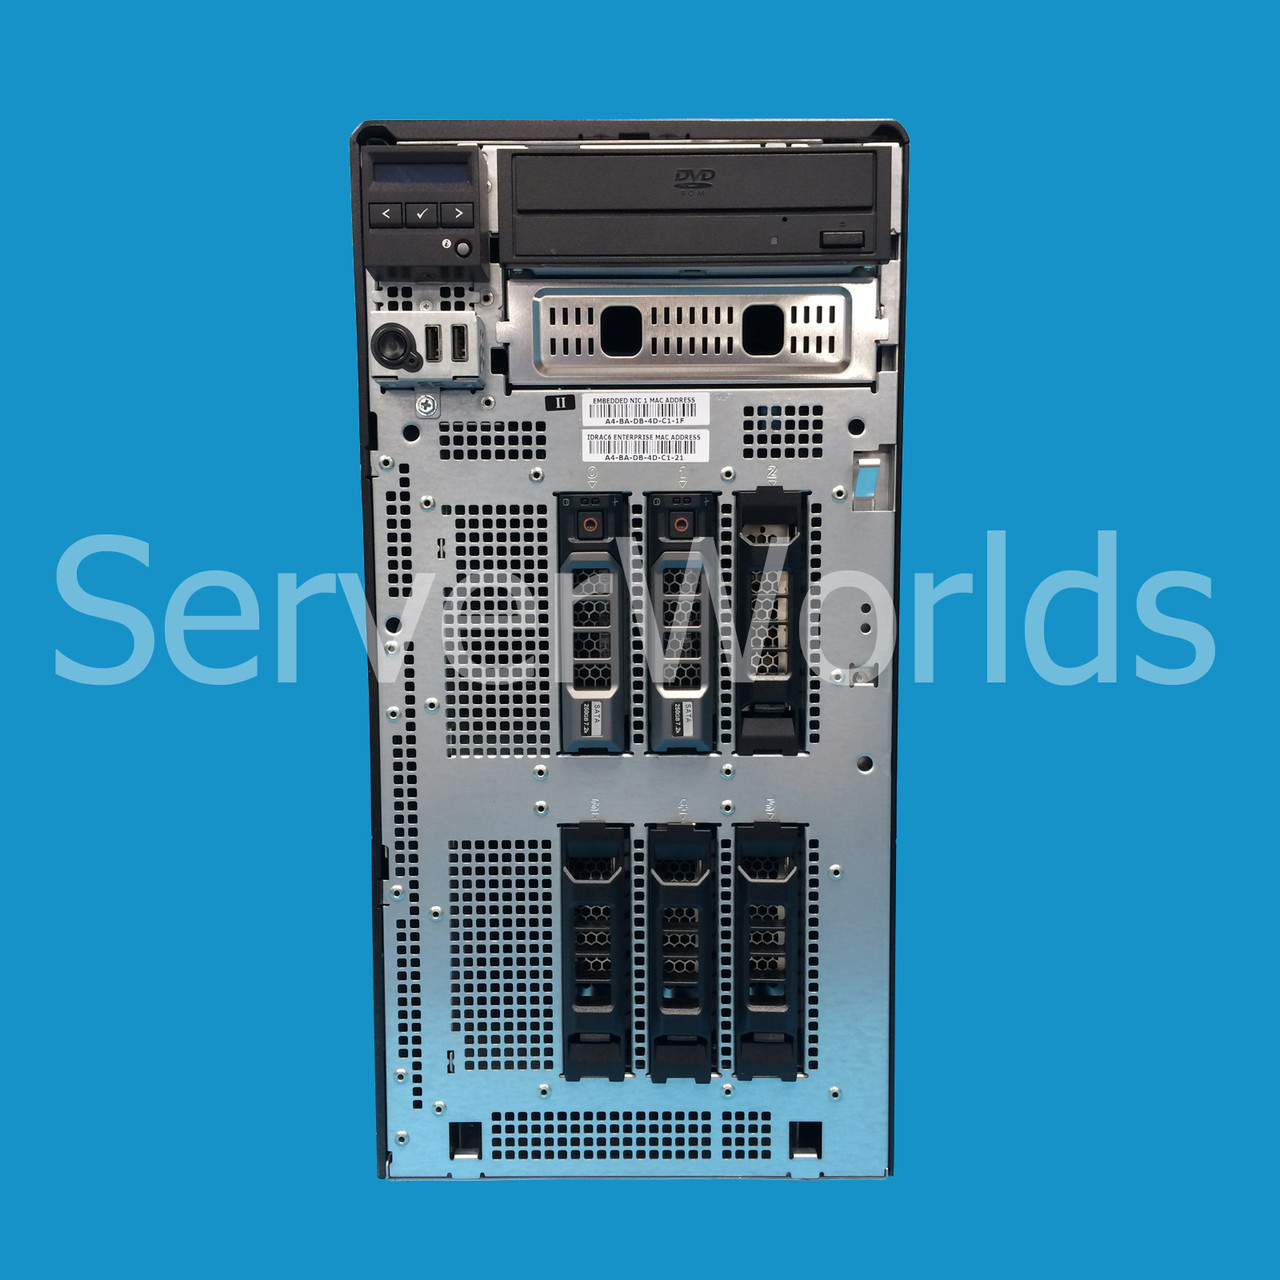 Refurbished Poweredge T410 Tower, Configured to Order